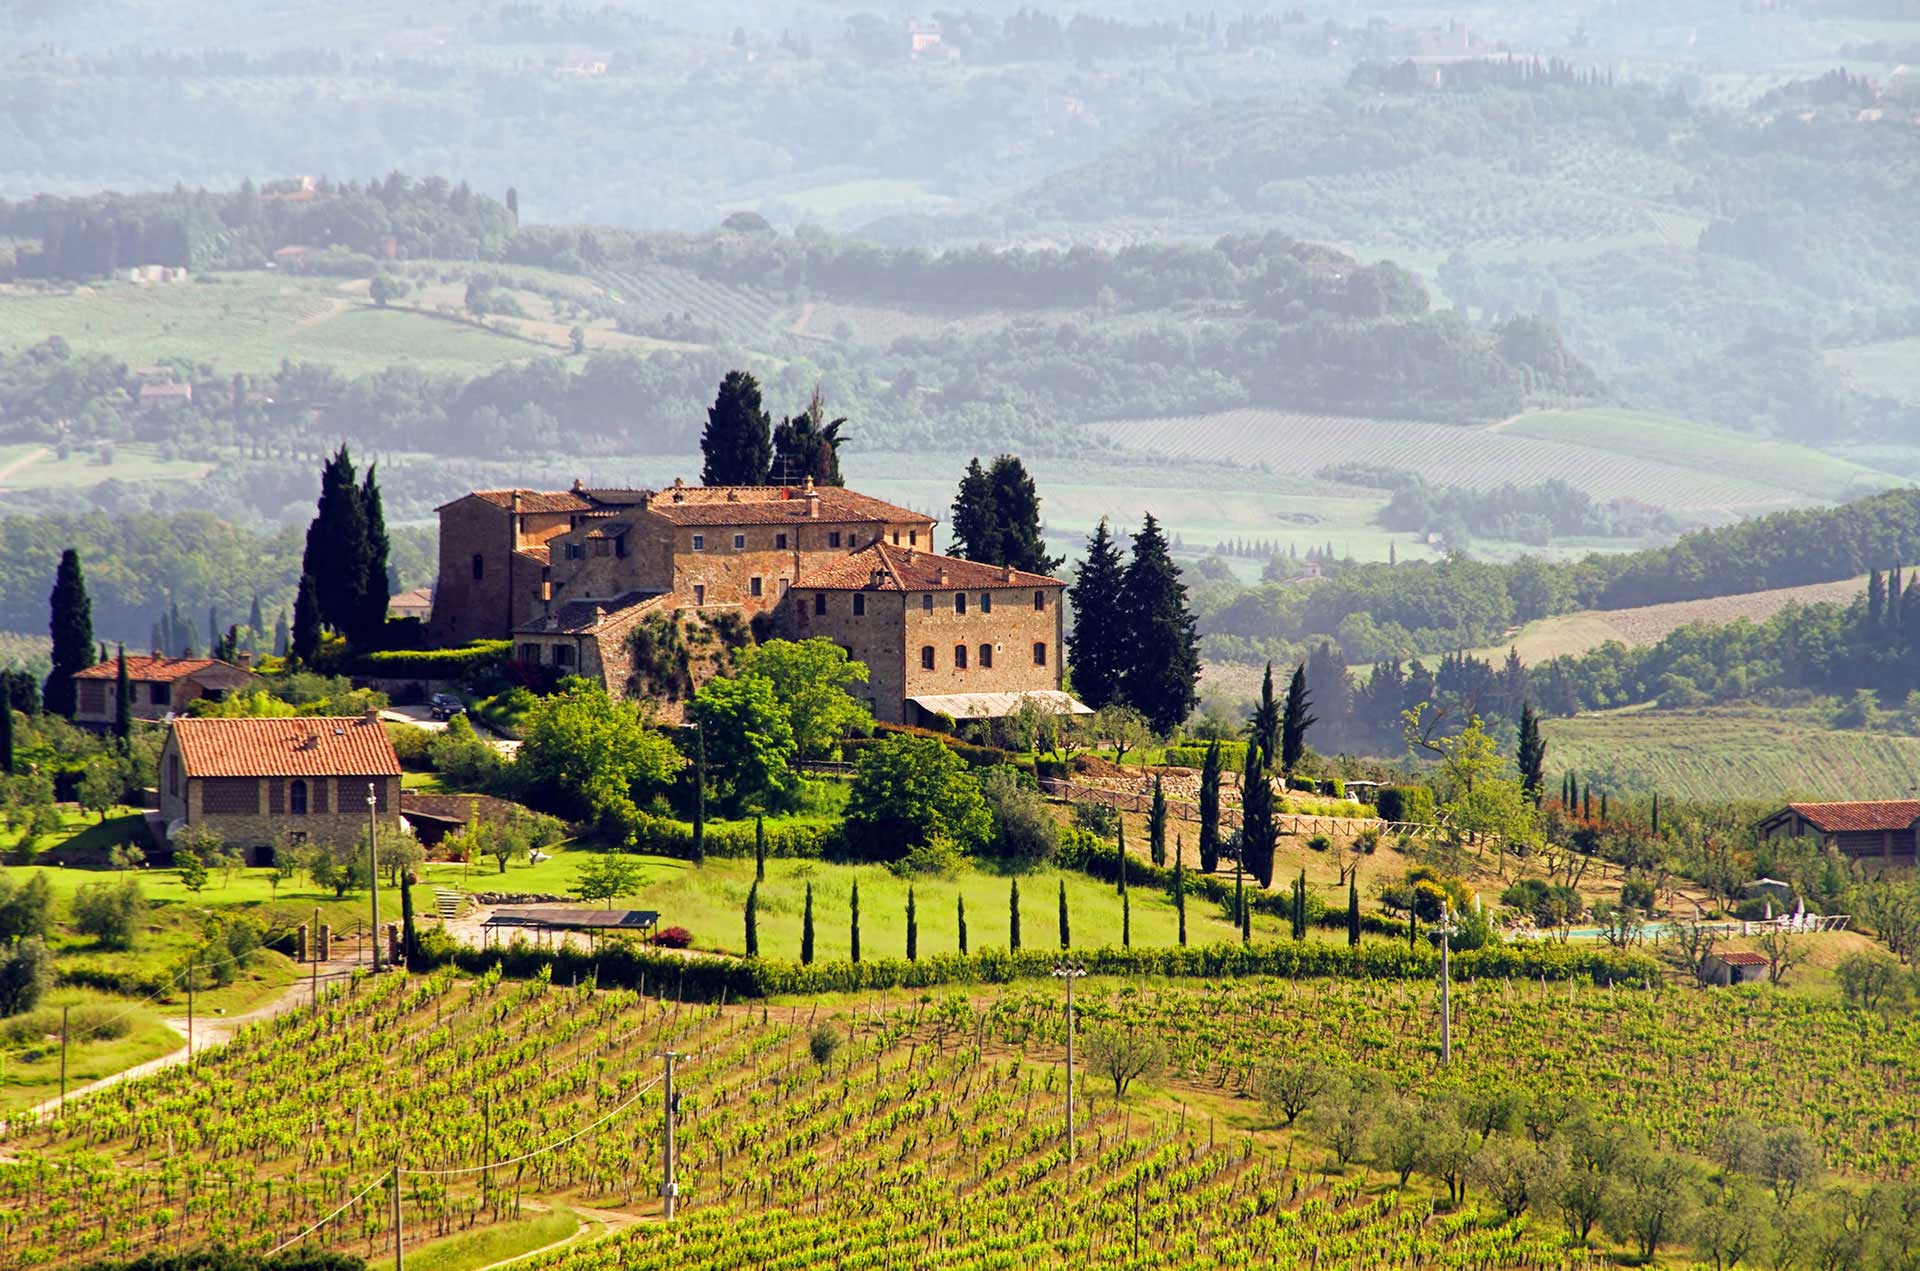 World of Wine: Italy, Spain & Portugal